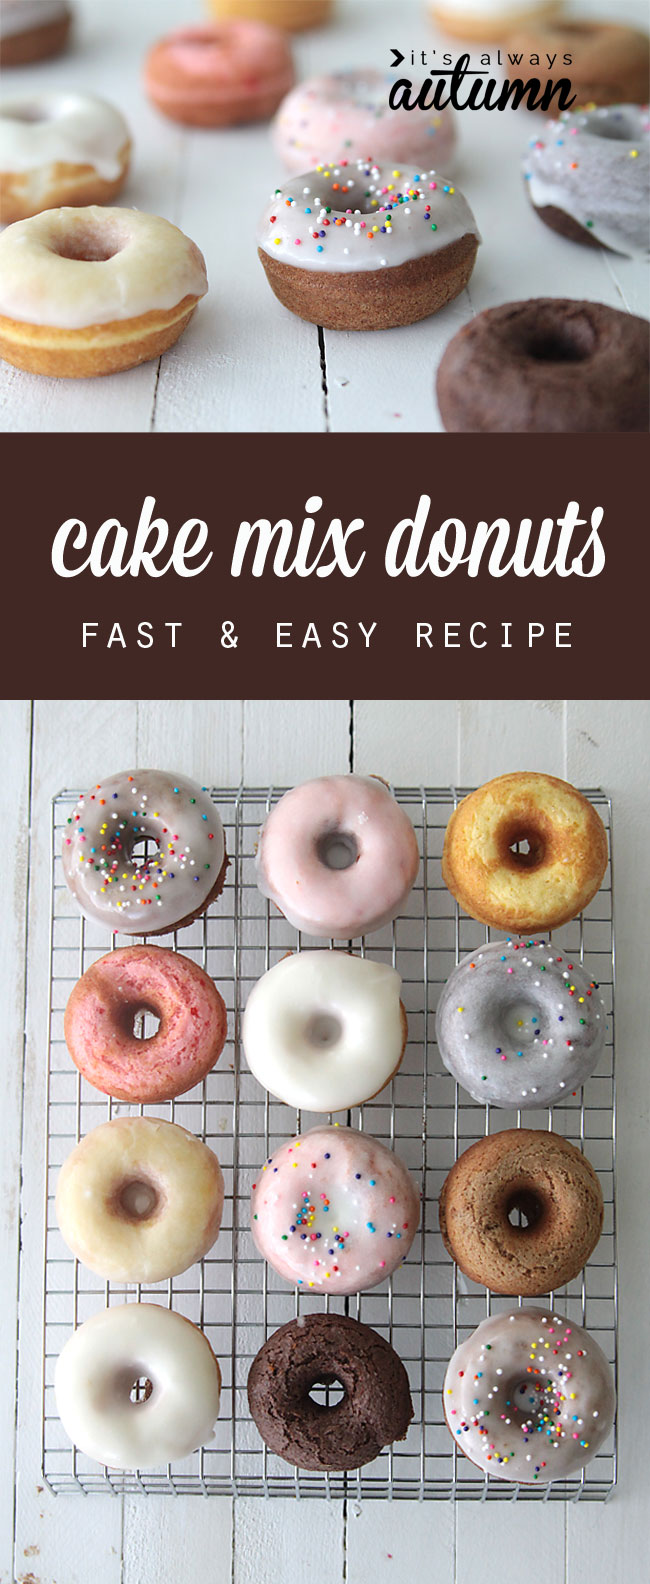 quick & easy {baked} cake mix donuts recipe